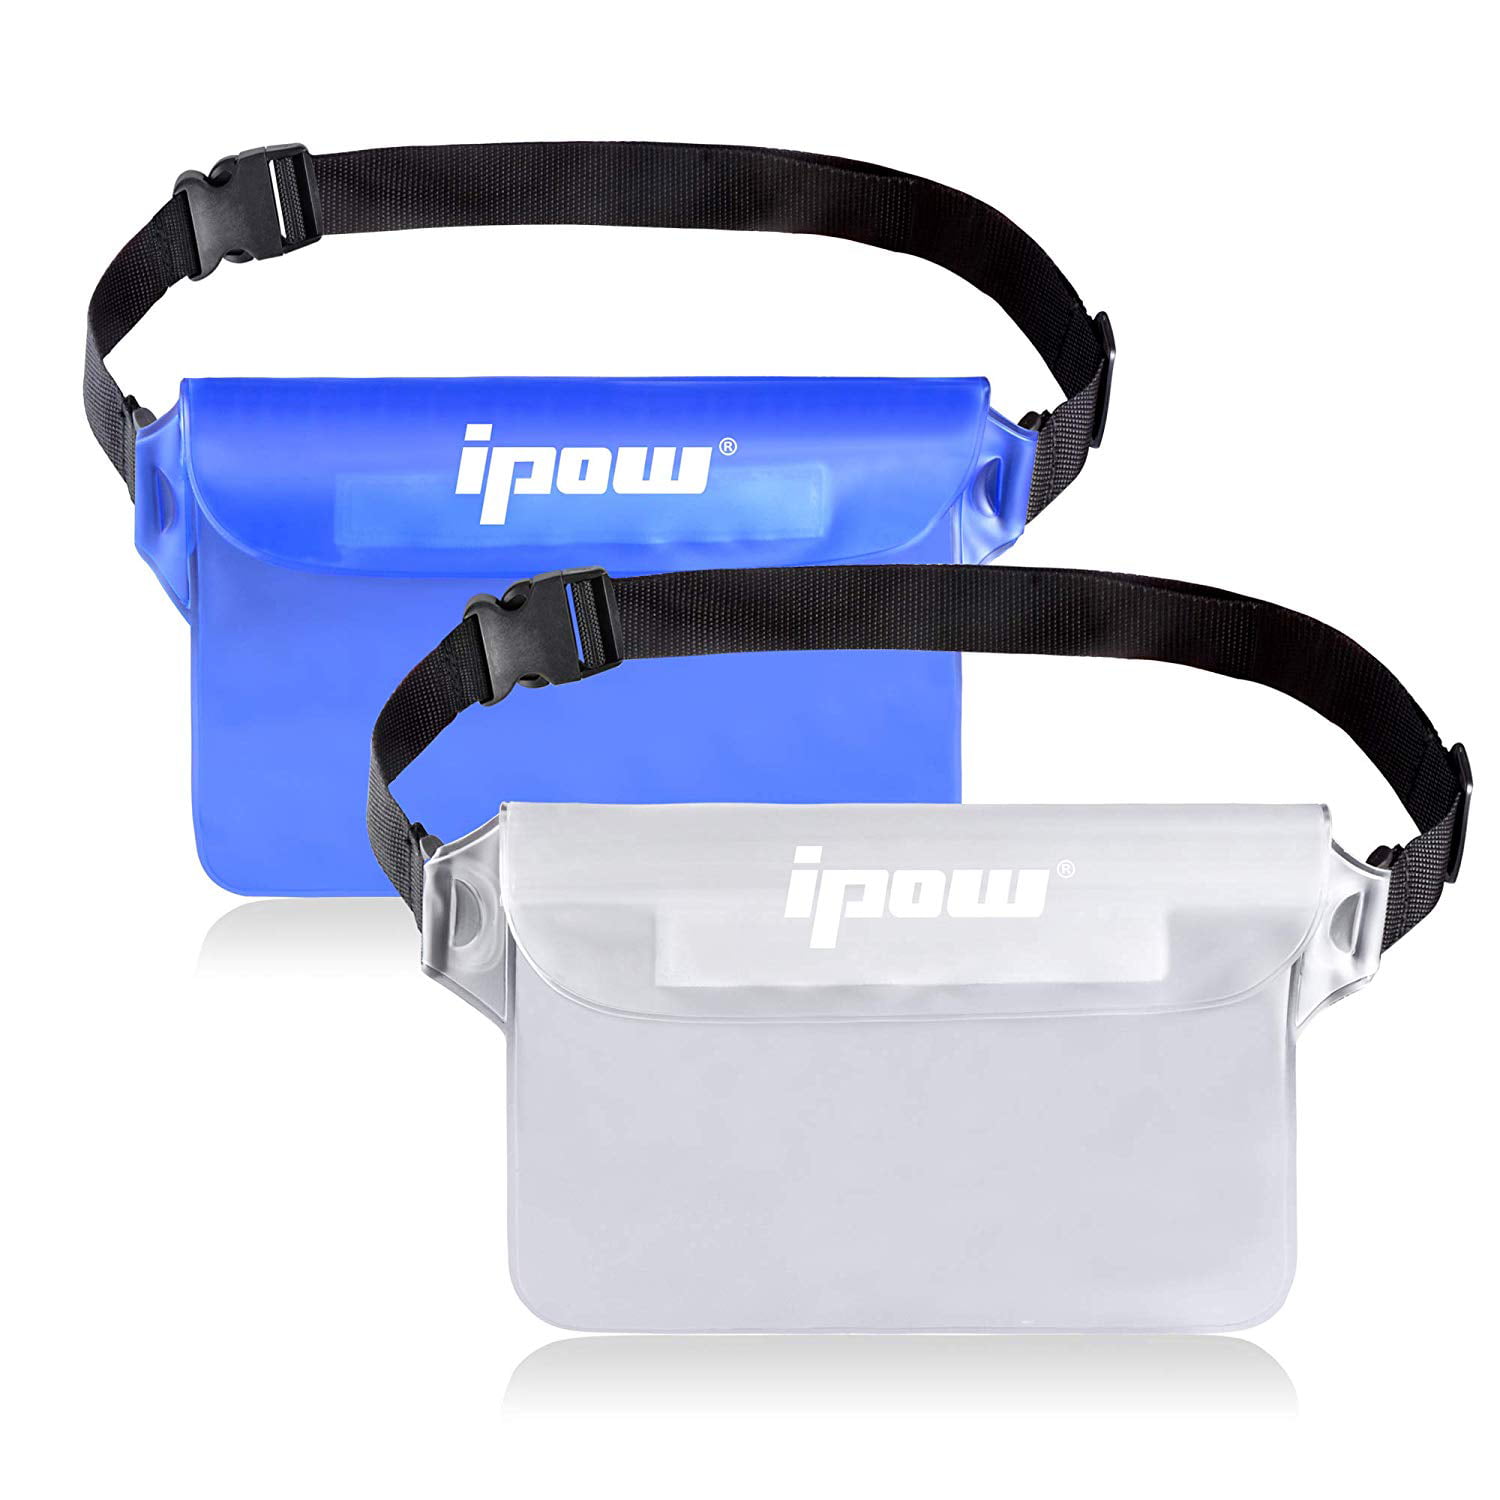 Pouch Bag Waterproof Case With Waist Strap For Beach Swimming Boating KayakingO6